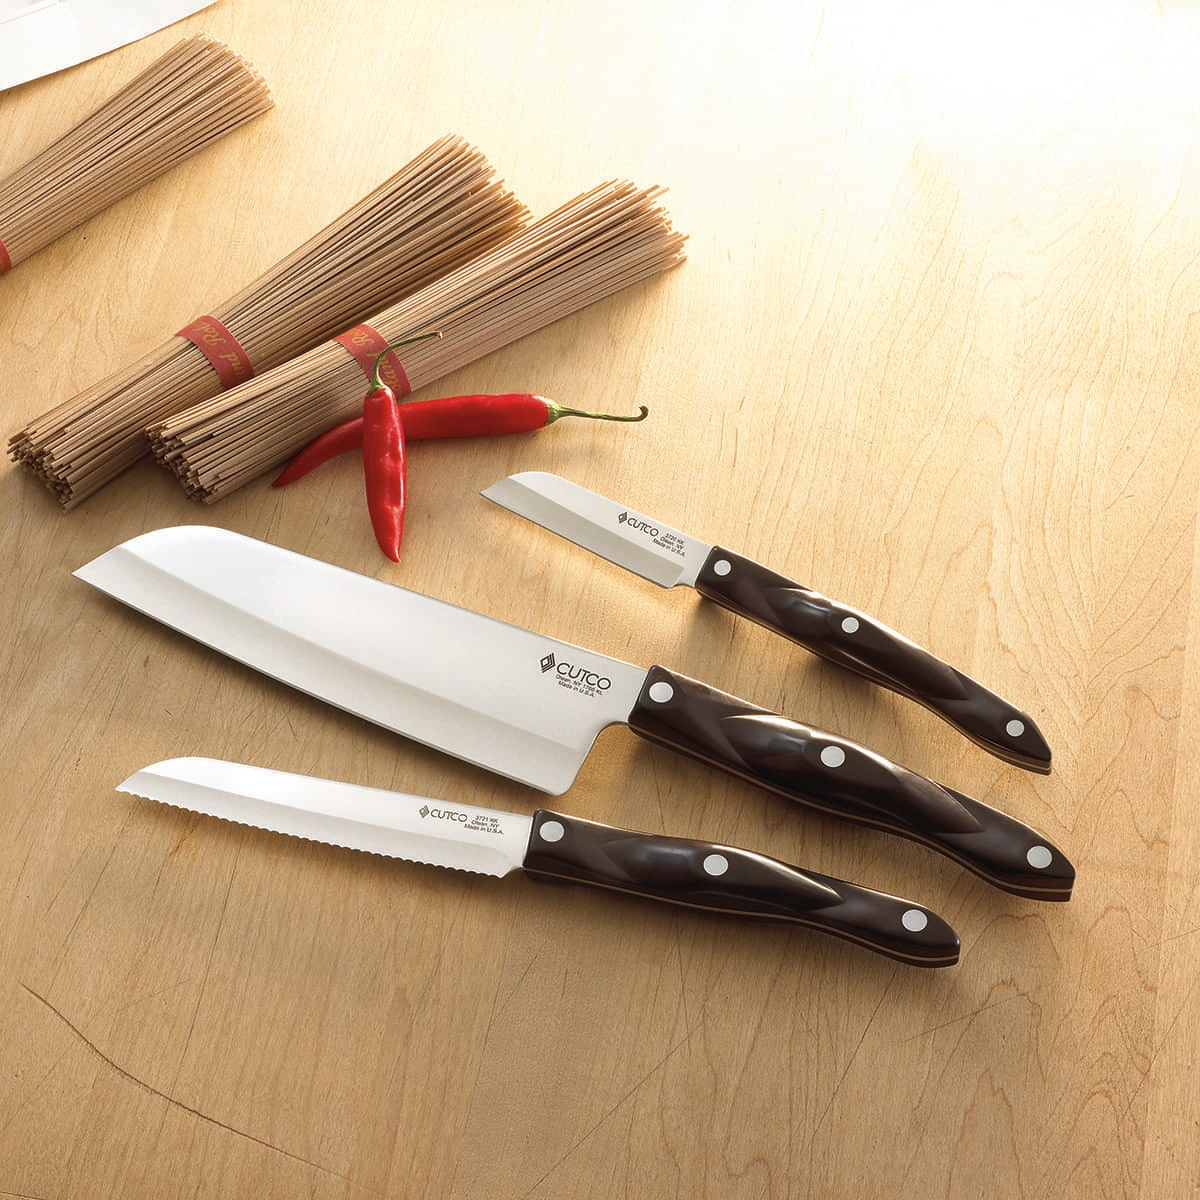 Review of the Cutco Kitchen Classics Knife Set